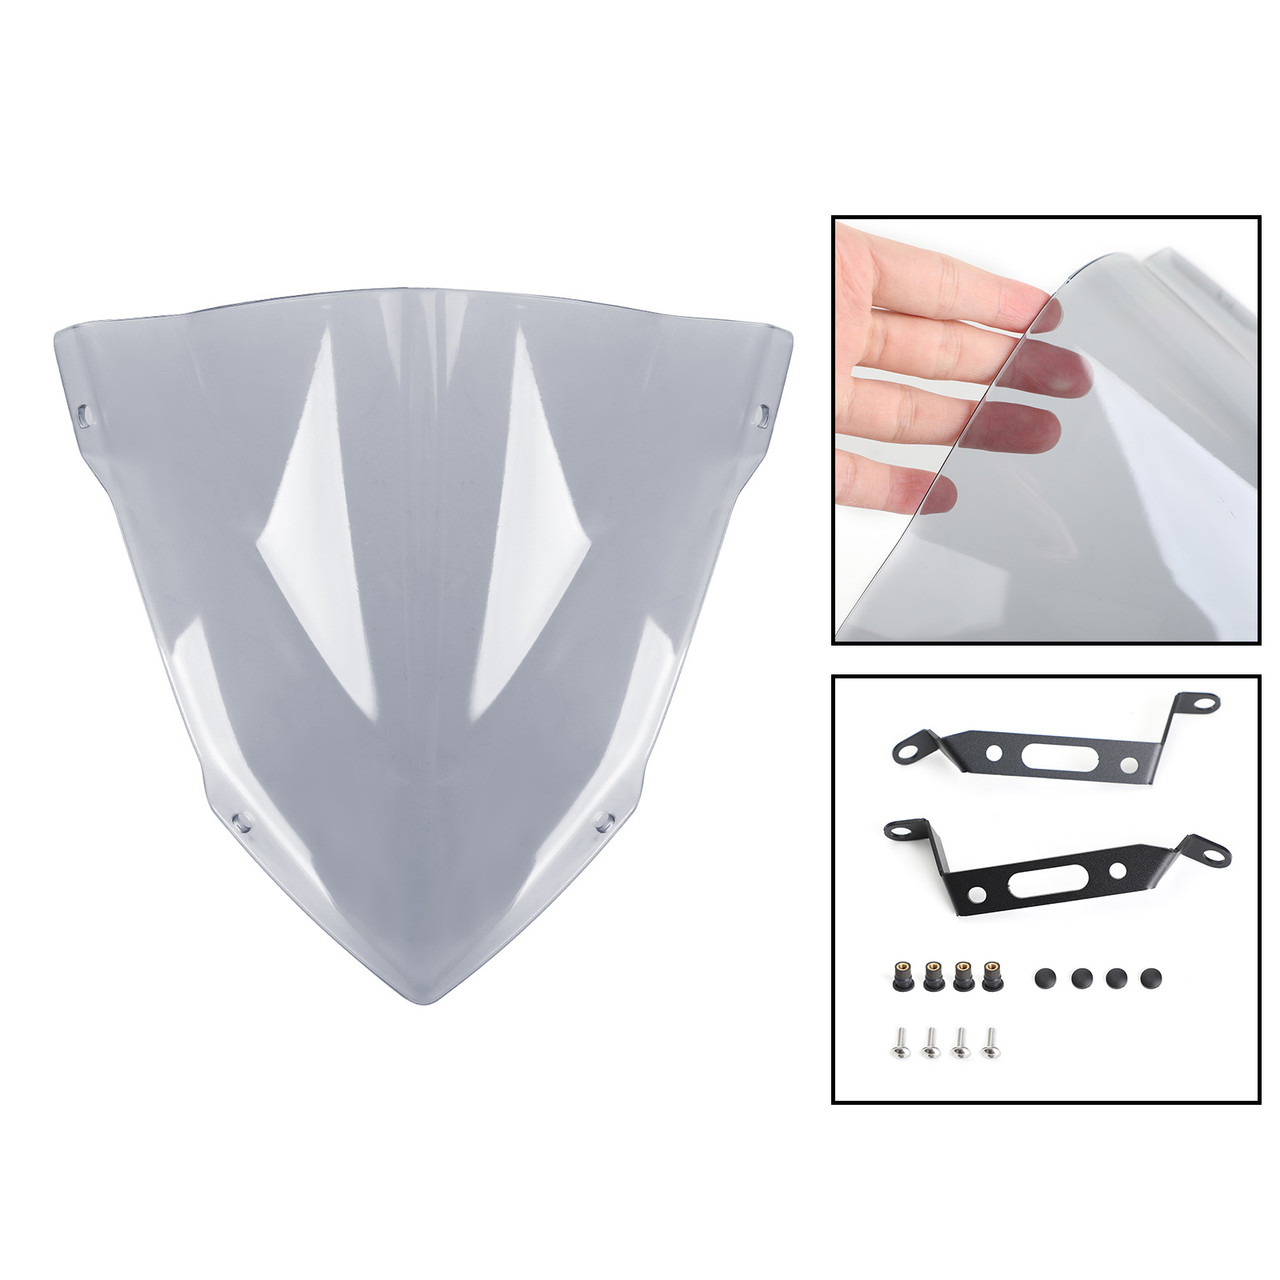 Windscreen Windshield Shield Protector Fit for Yamaha MT-07 2018-2020 Gray